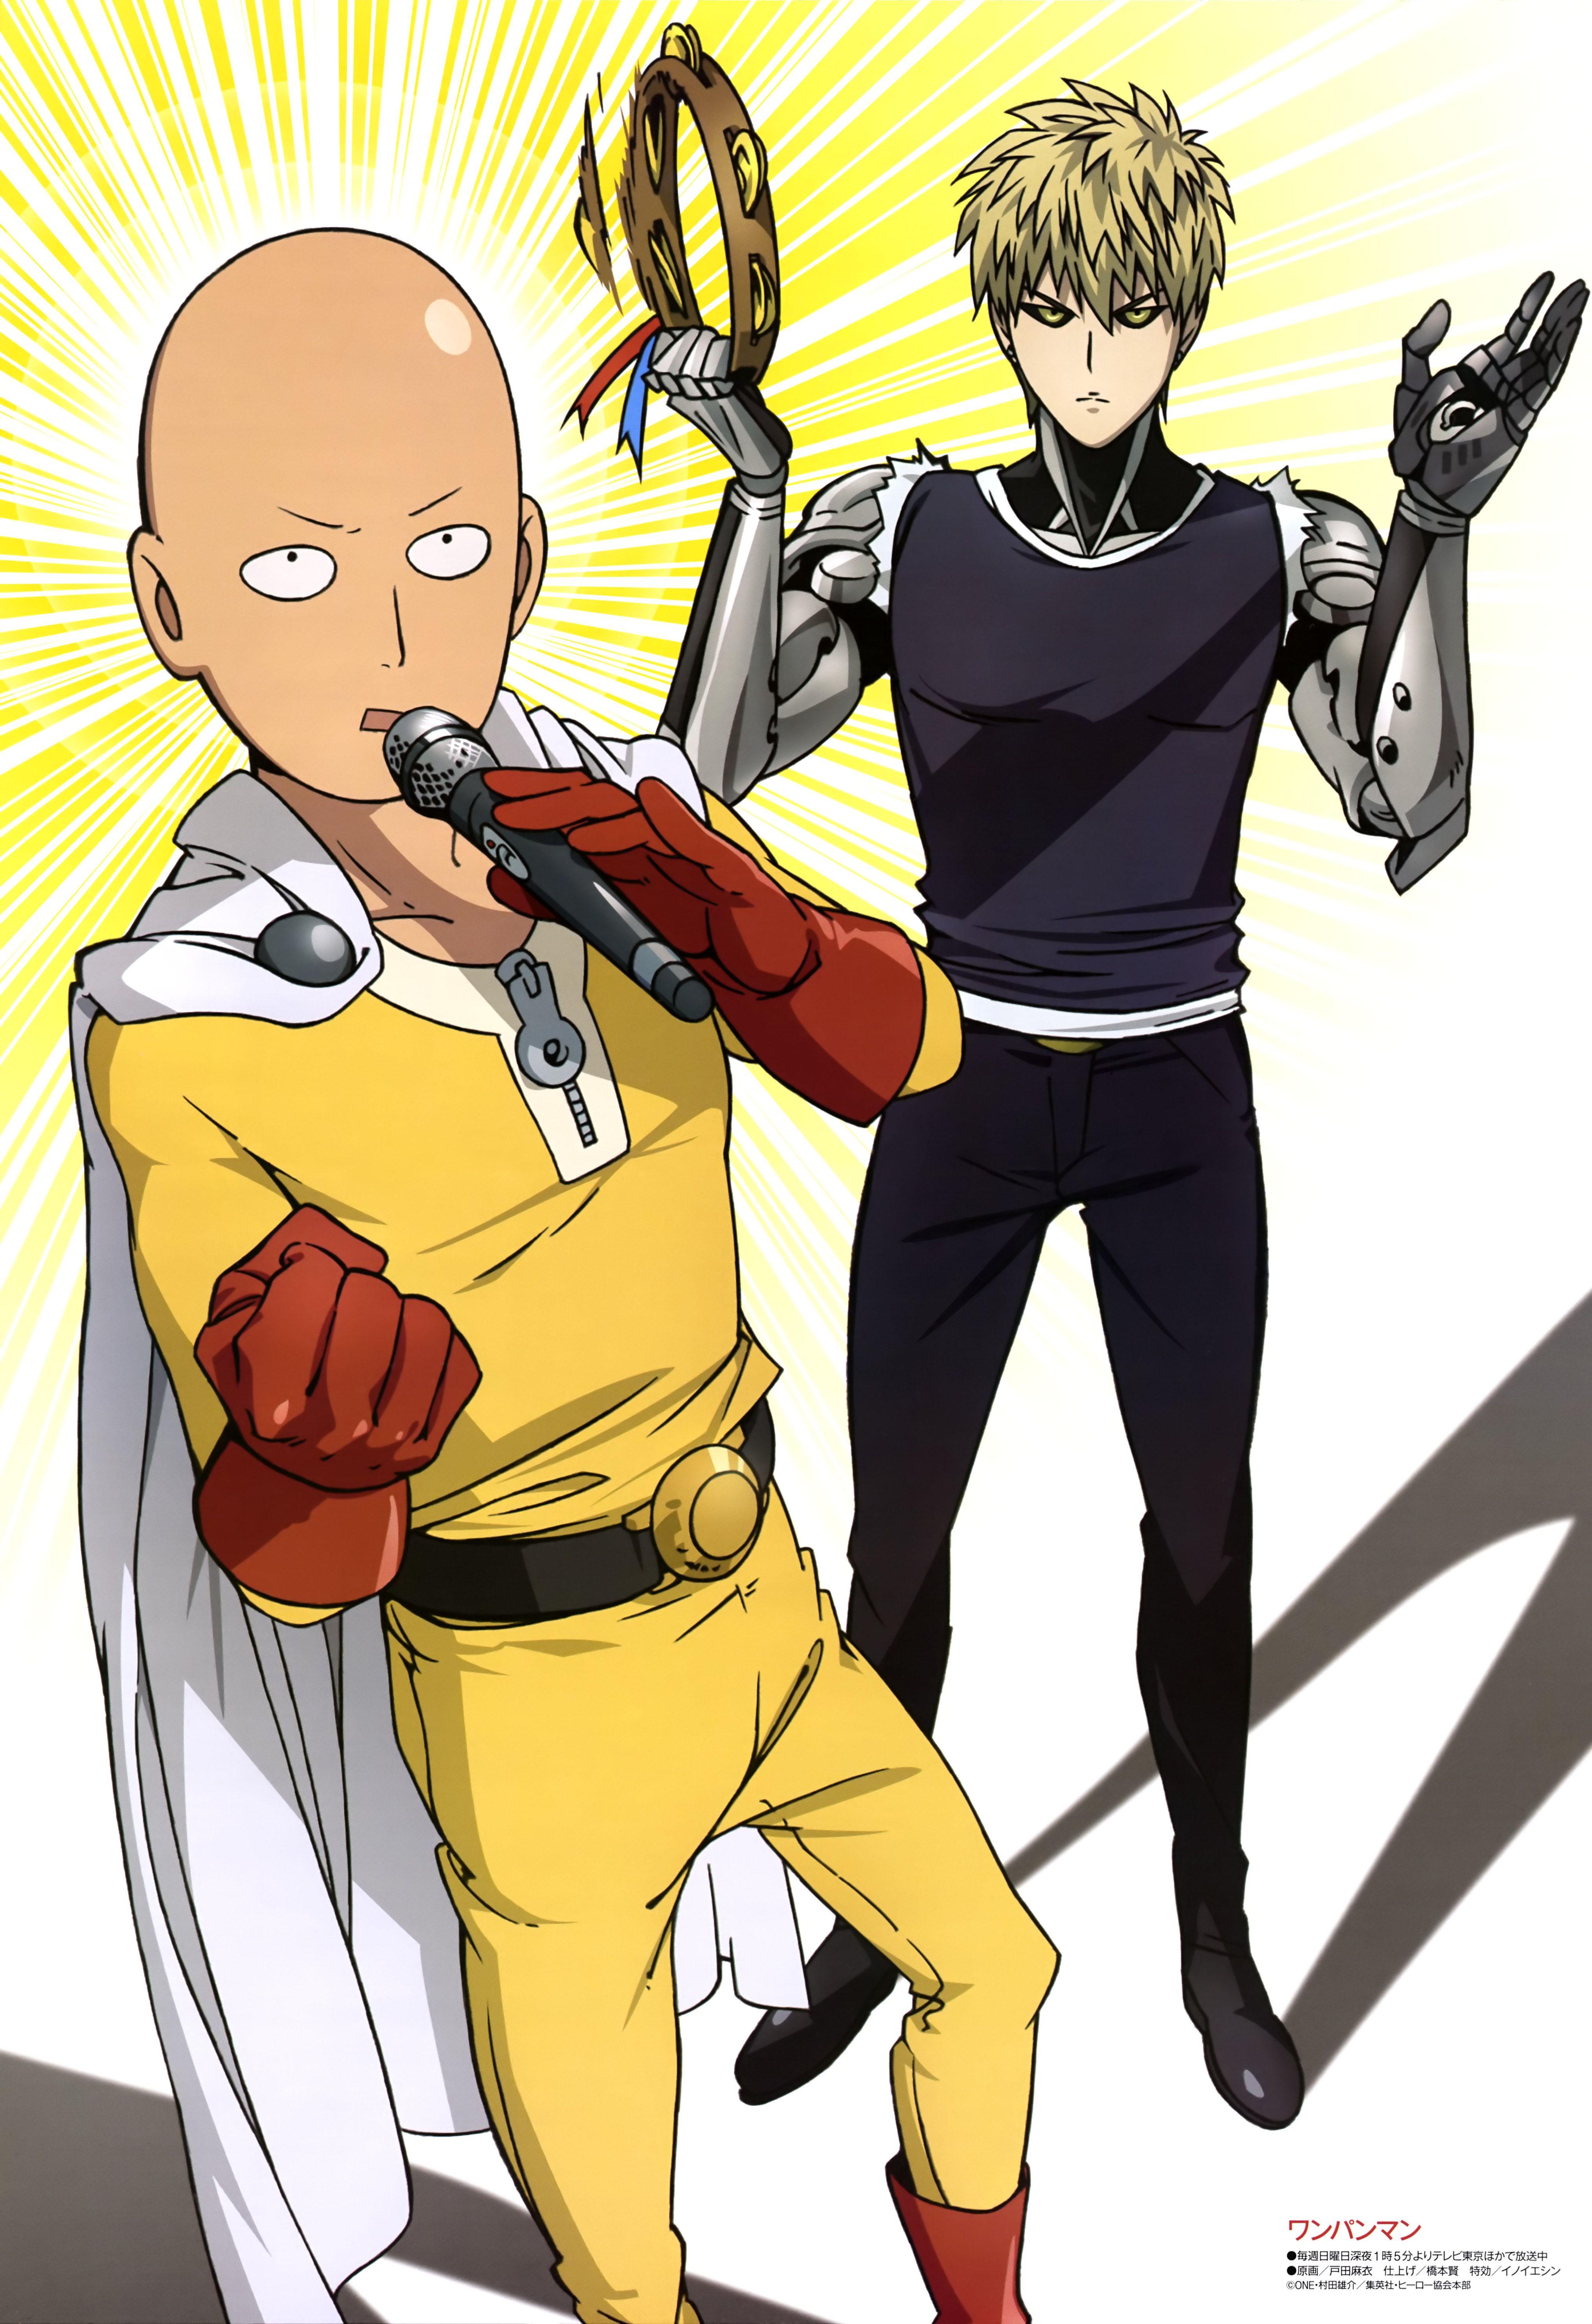 iDeviceArt on X: One Punch Man #Wallpaper #iPhone7 #iPhone7Plus #iPhone6s  #iPhone6sPlus #Apple #Android #iDeviceArt #RT    / X